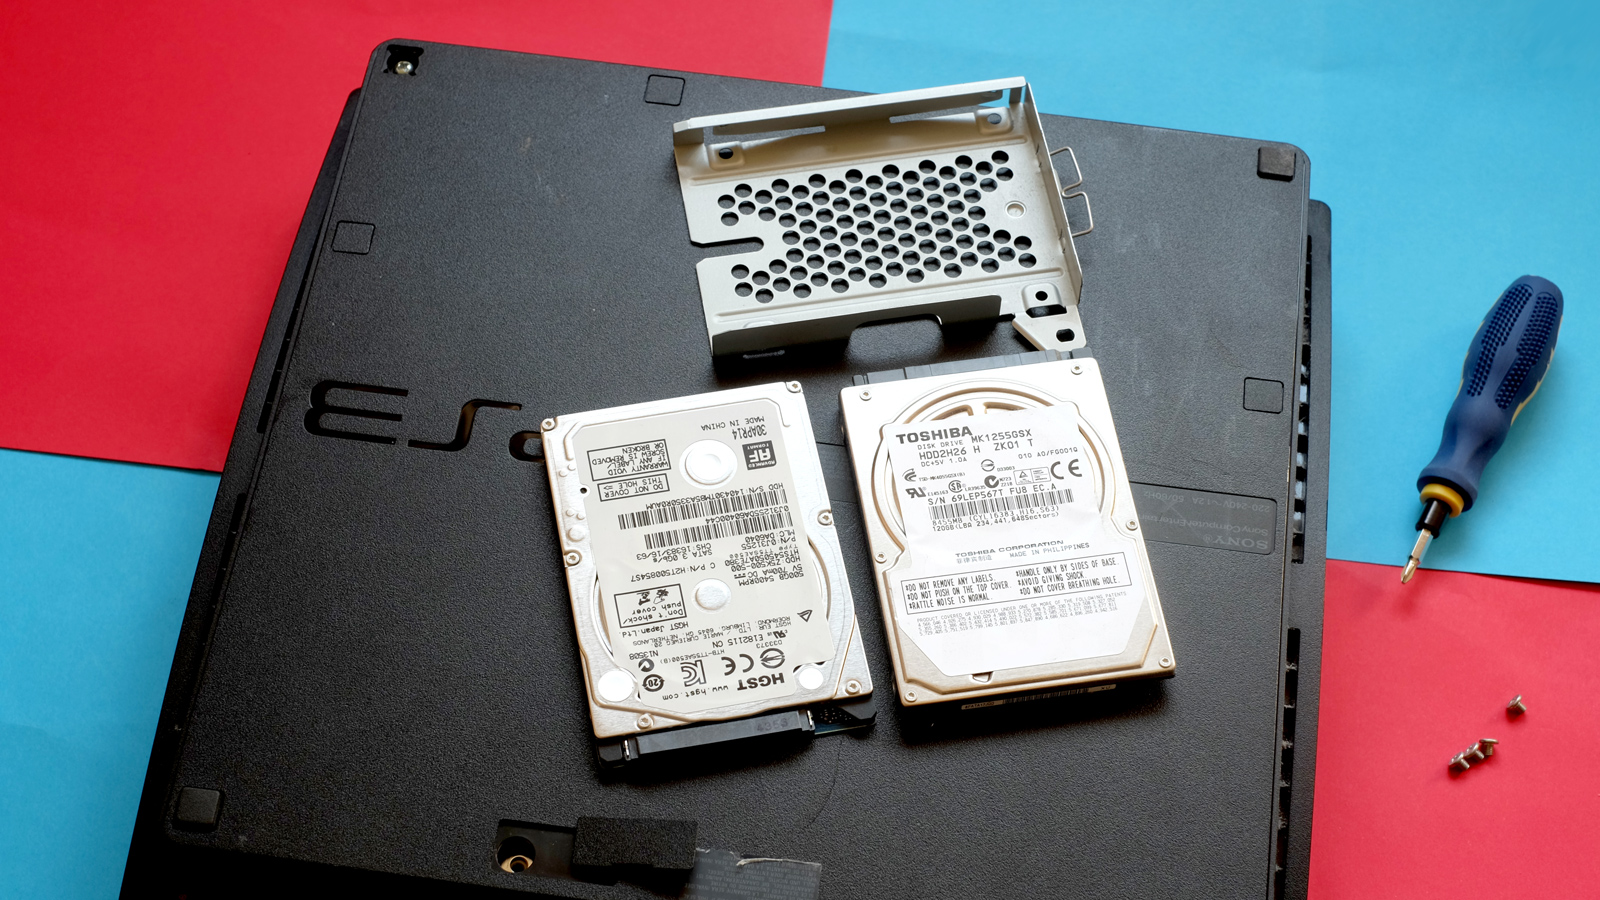 best ssd for ps3